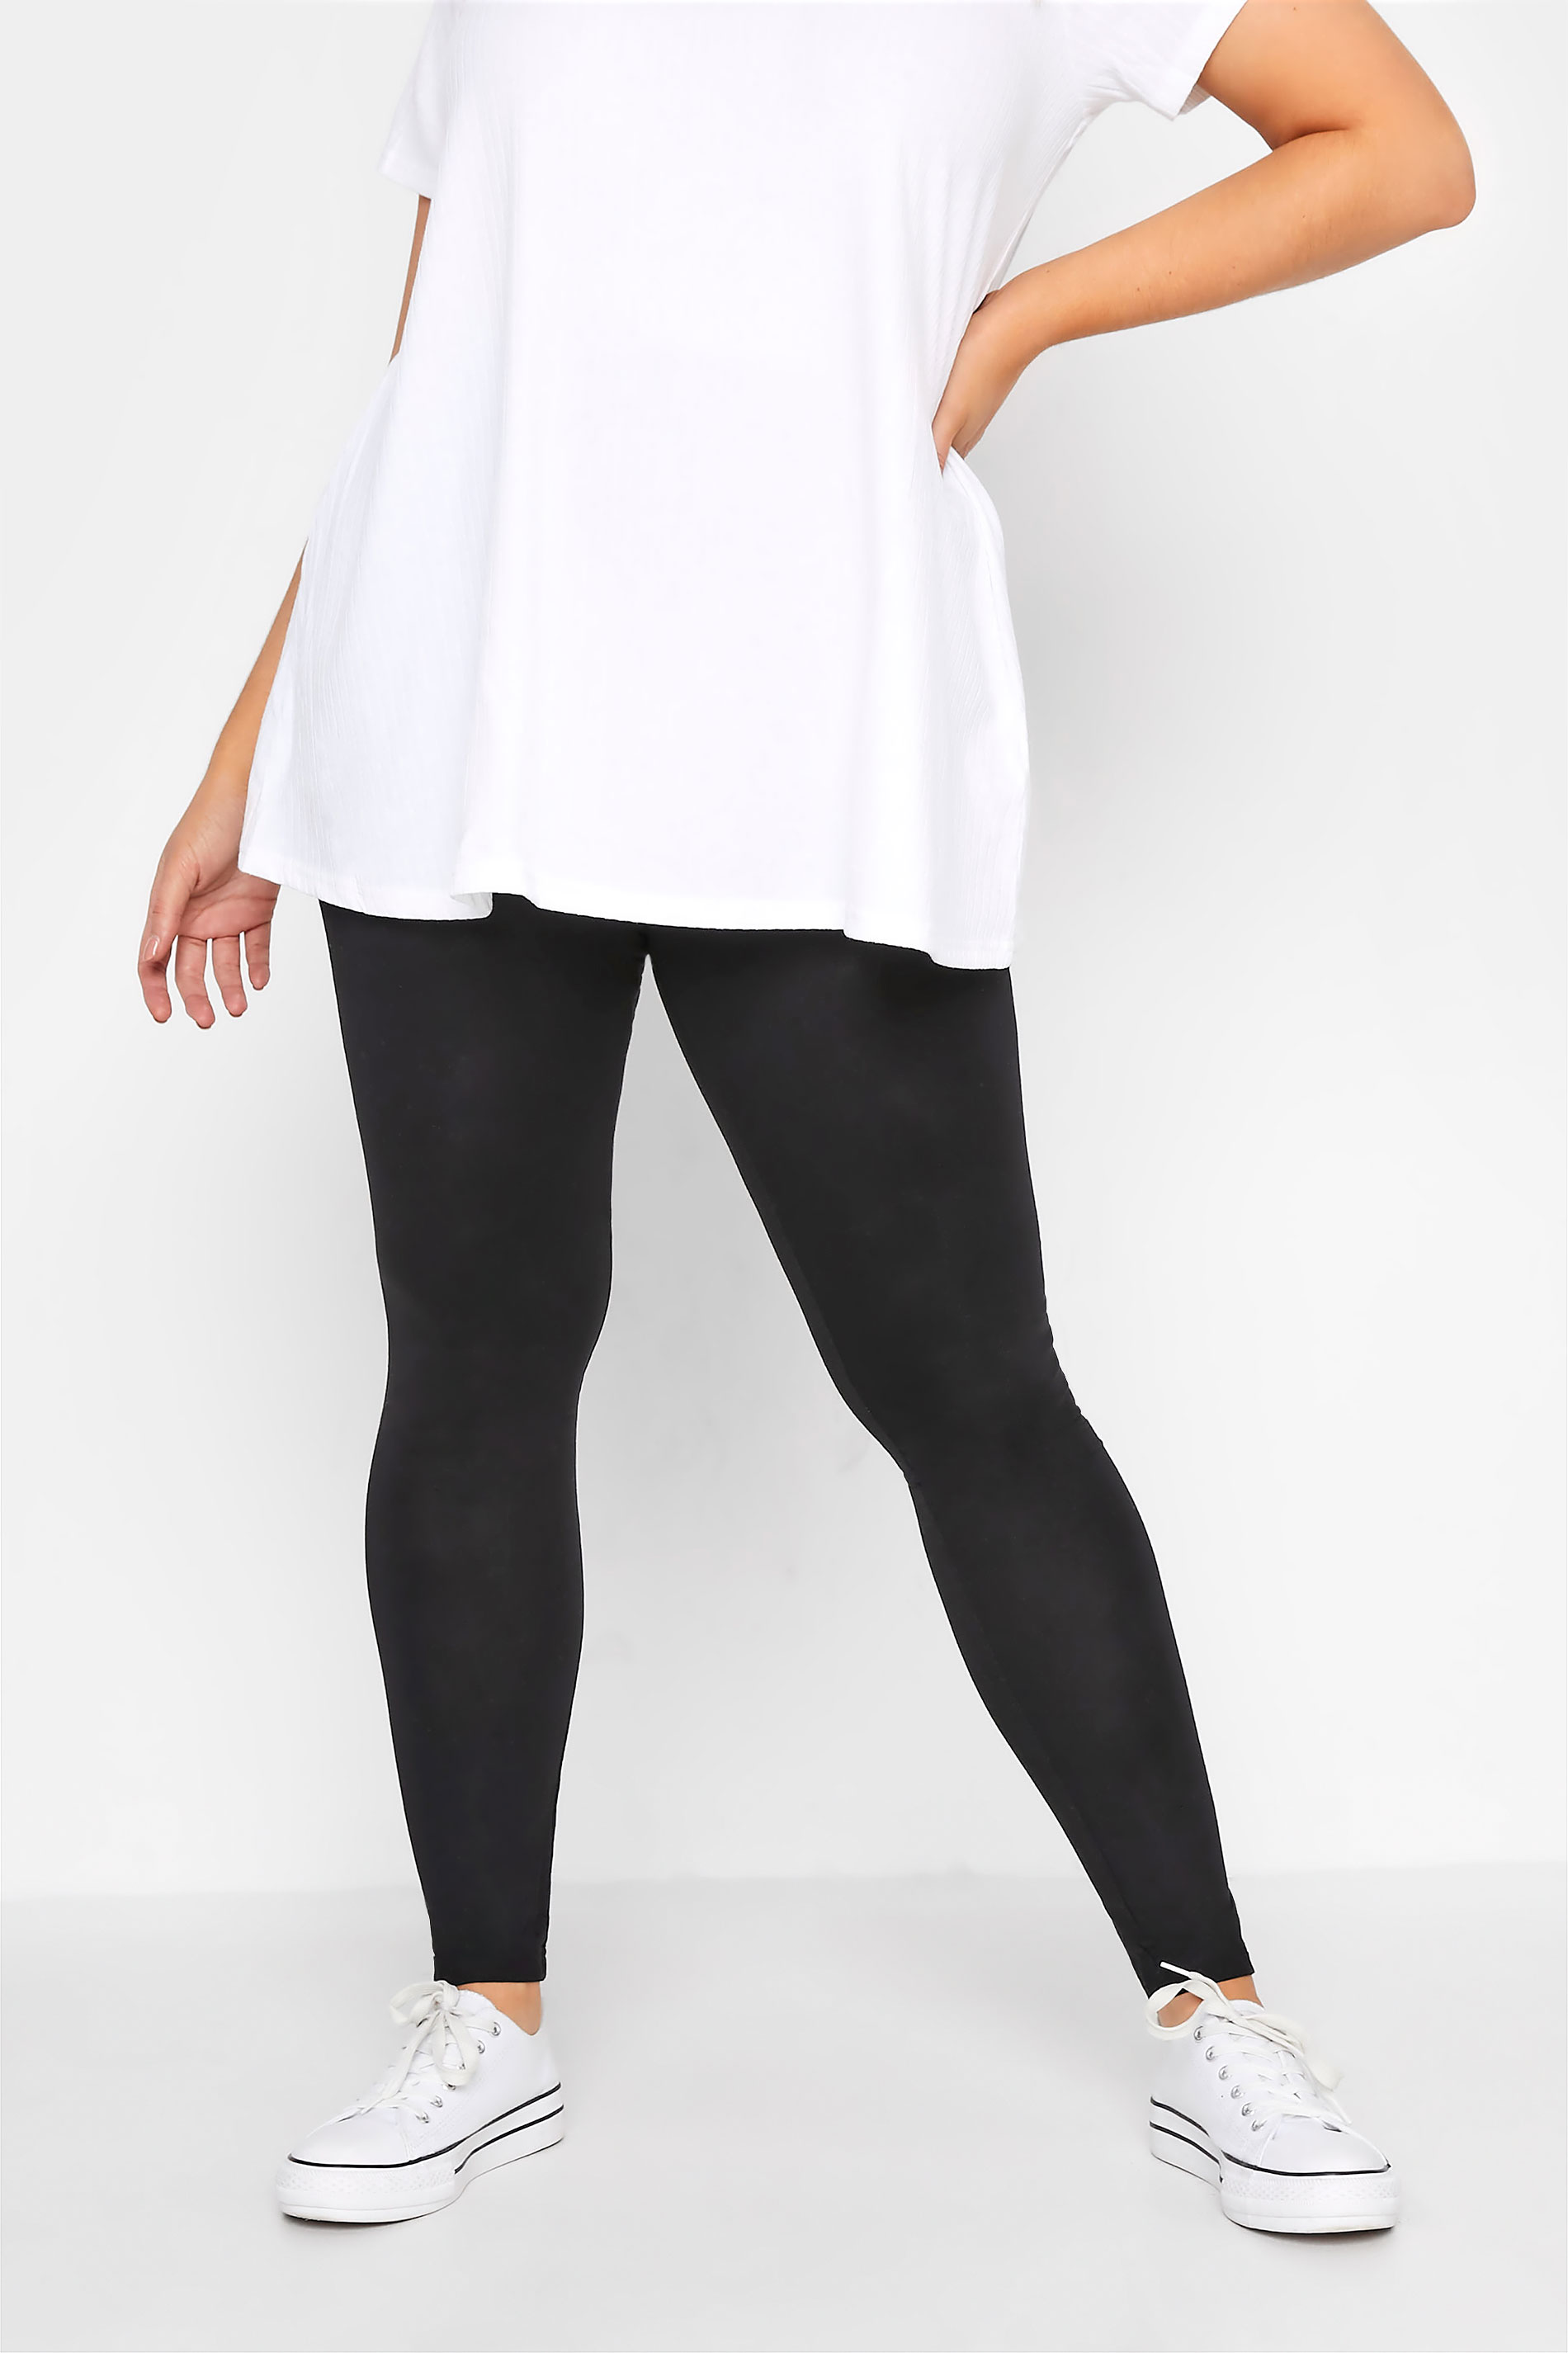 Plus Size 2 PACK Black Soft Touch Stretch Leggings | Yours Clothing 2